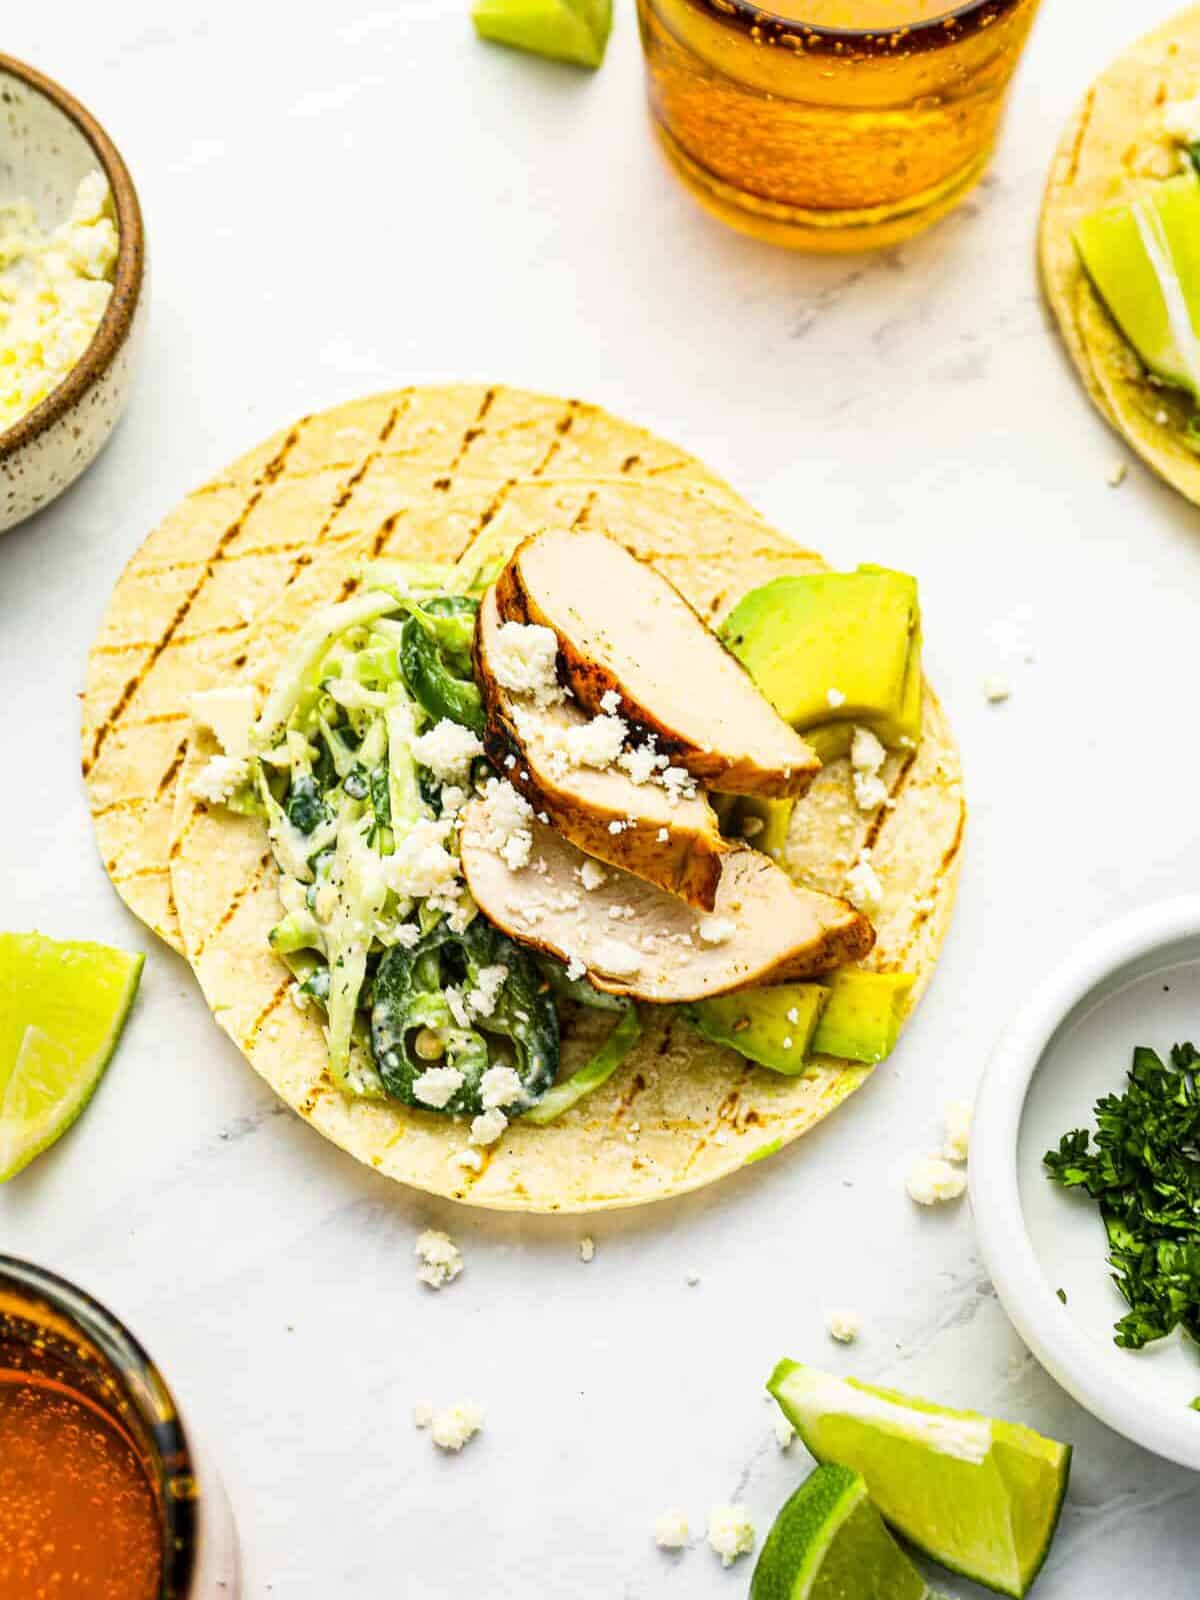 overhead view of an open-faced grilled chicken taco on top of another grilled tortilla.